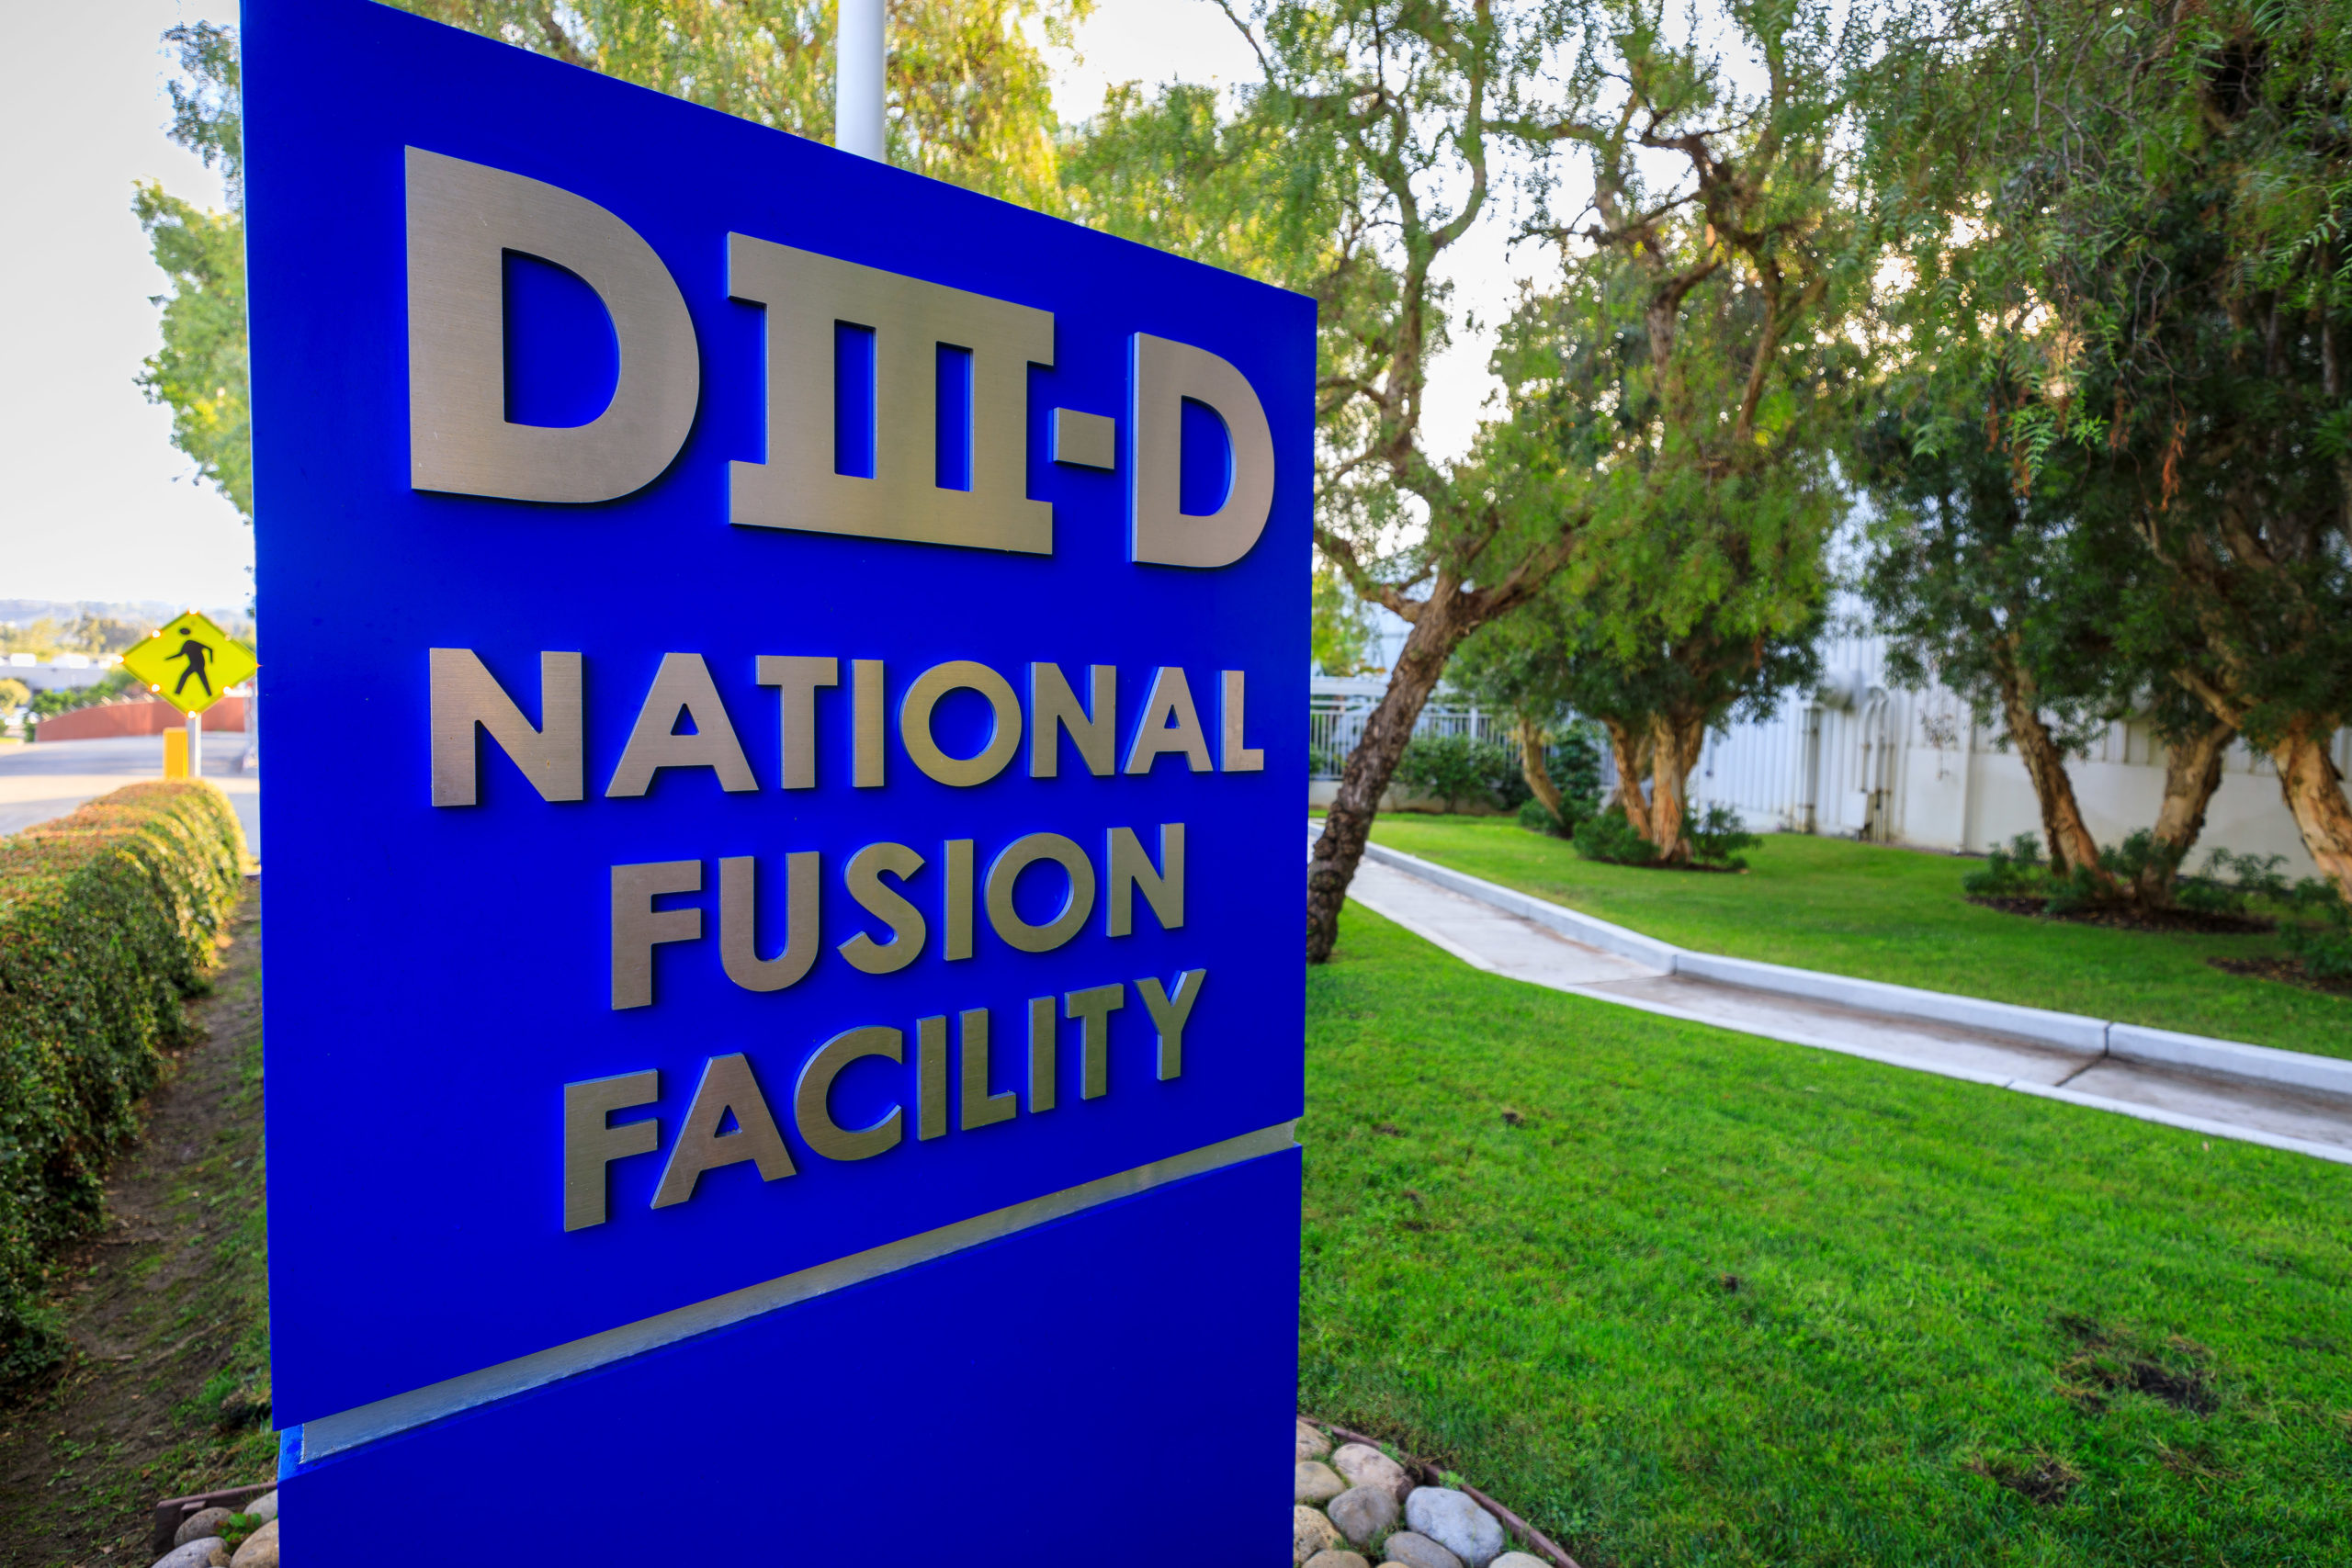 Blue sign reading "DIII-D National Fusion Facility"